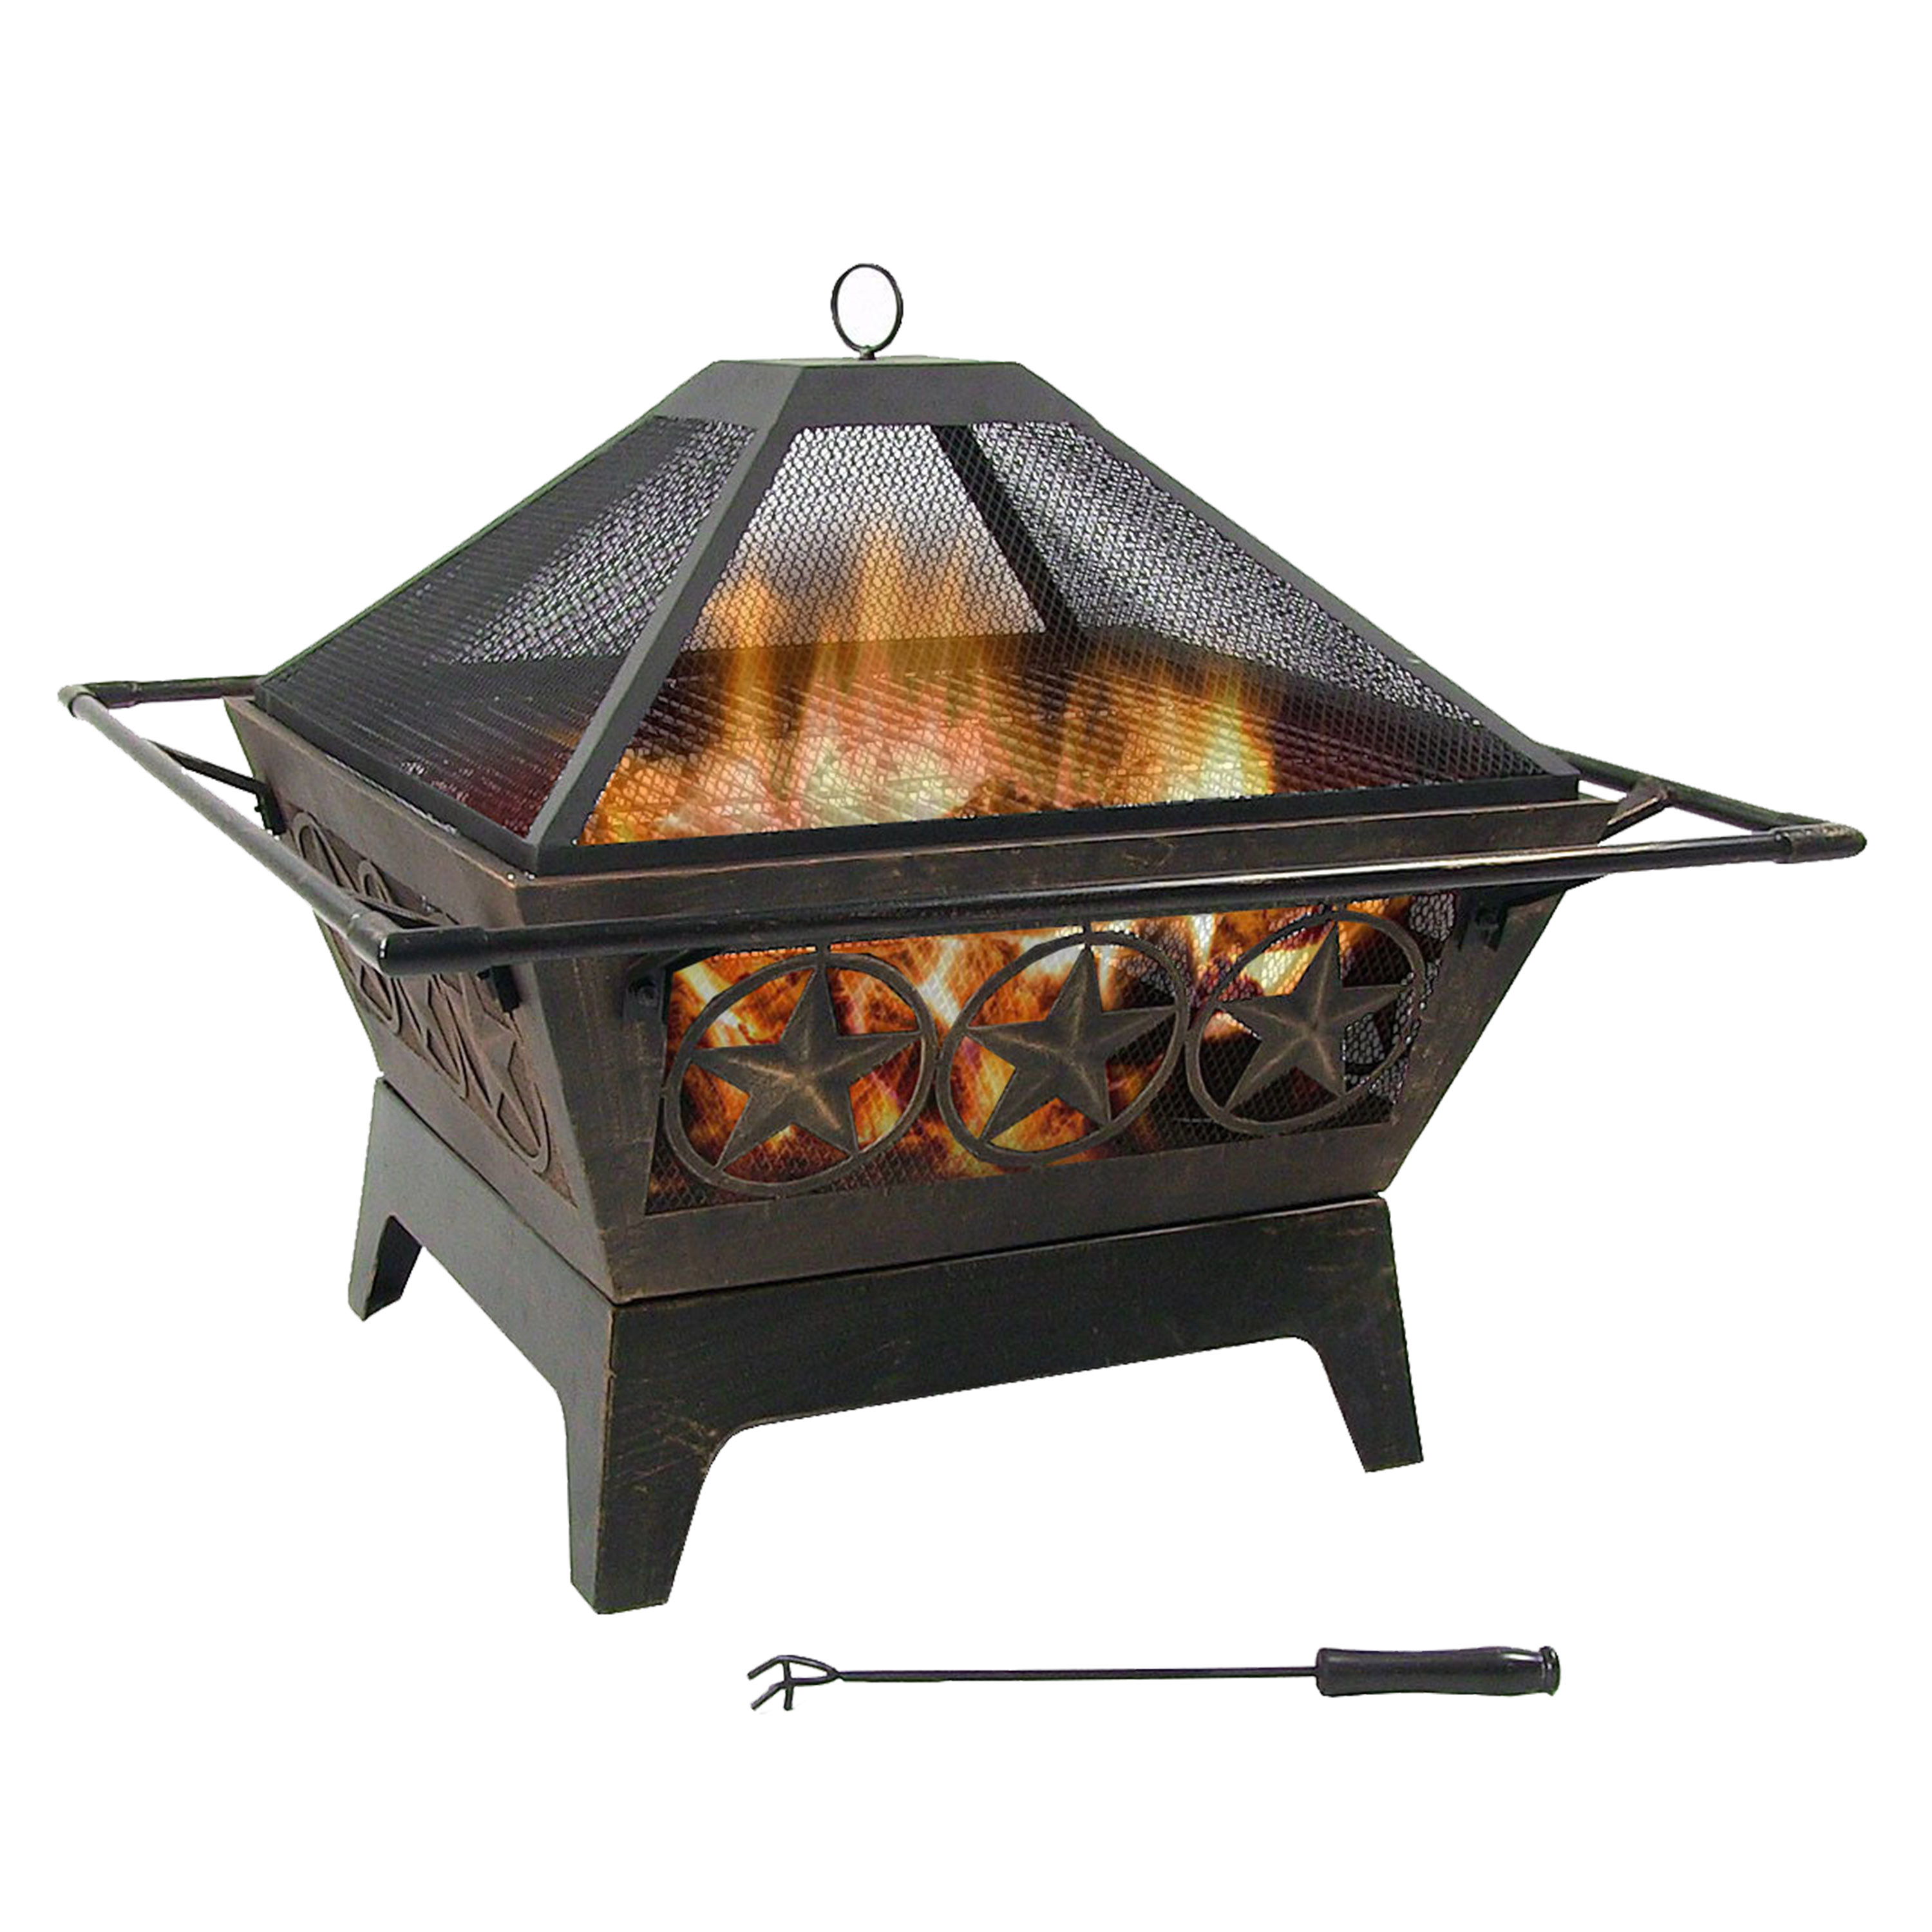 Sunnydaze Northern Galaxy Square Fire Pit with Cooking Grate - 32-Inch